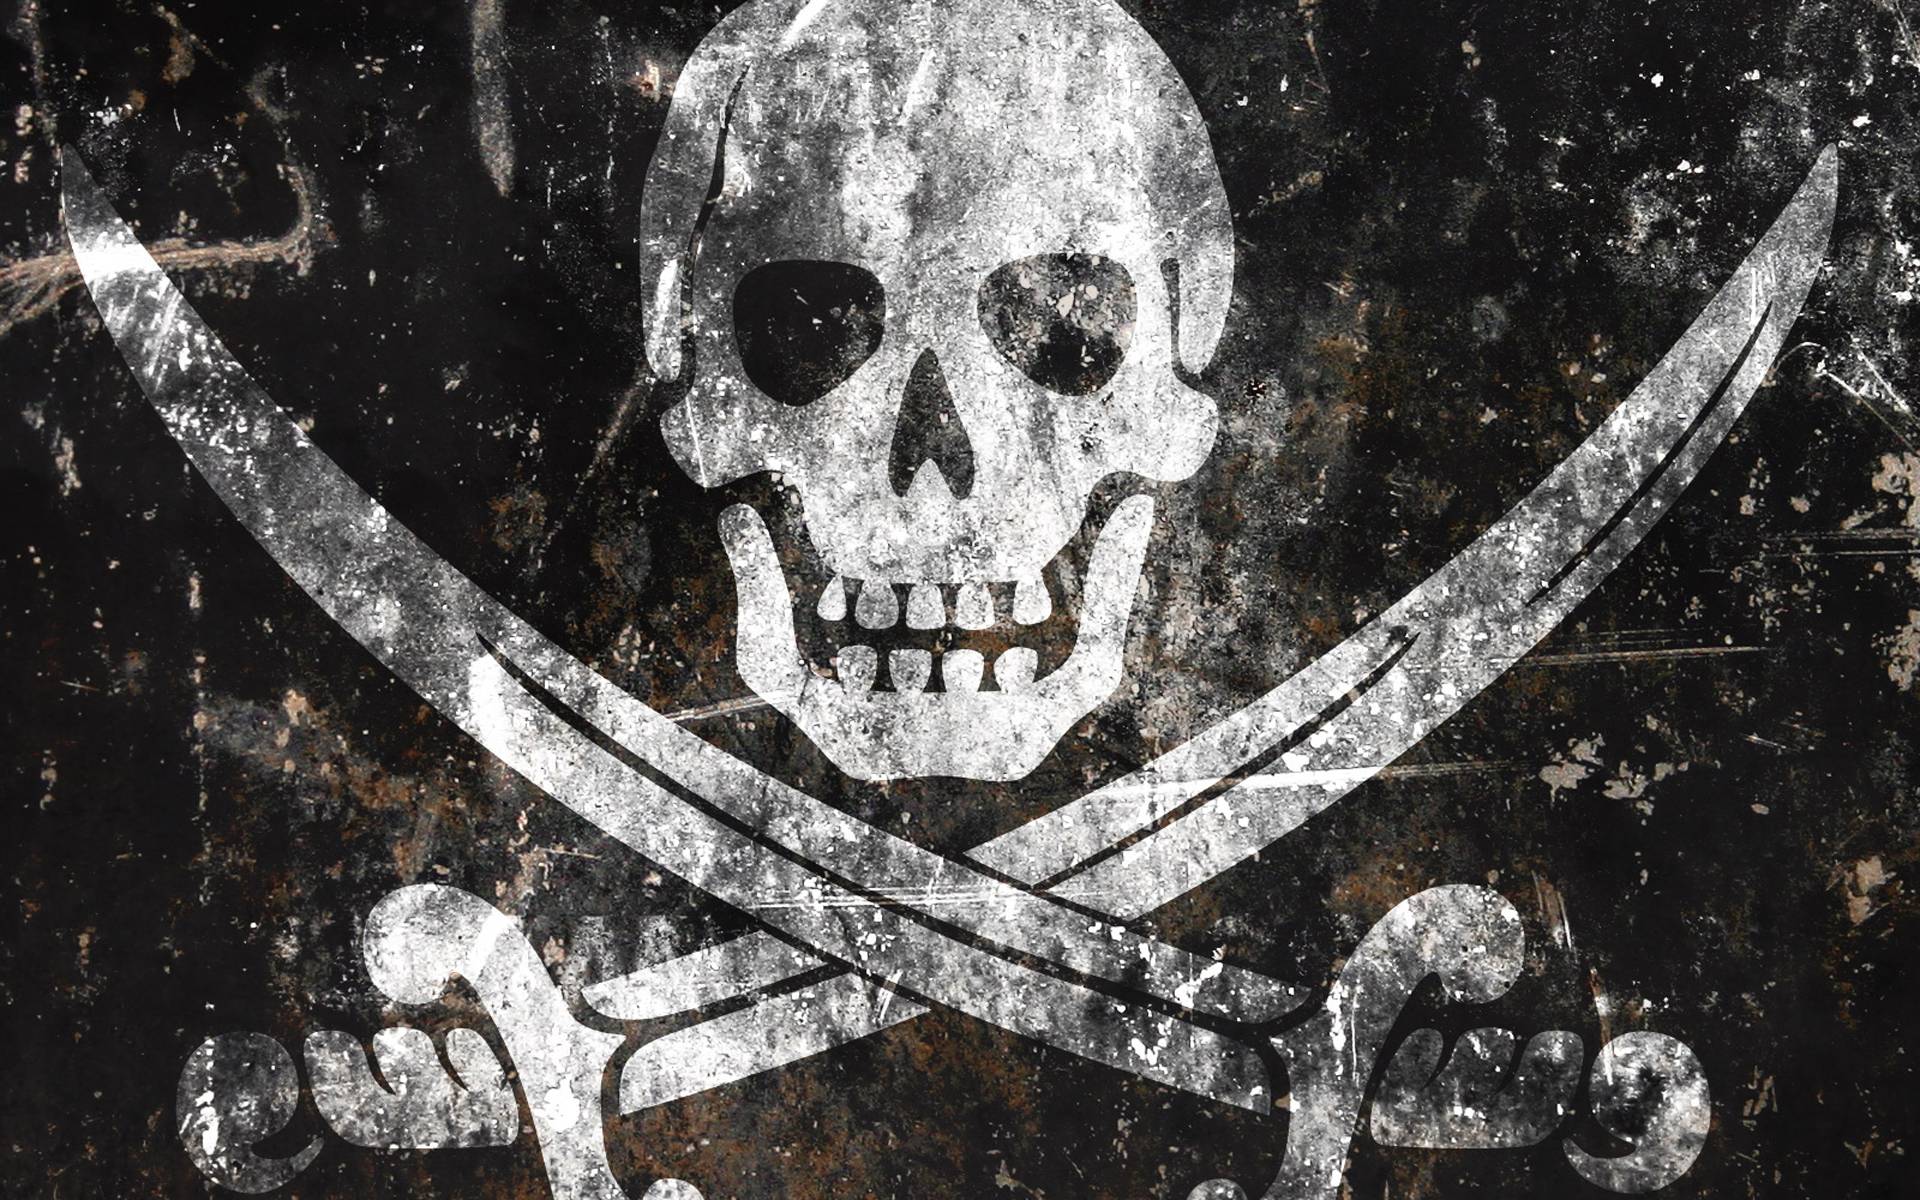 Jolly Roger Wallpapers Wallpaper Cave